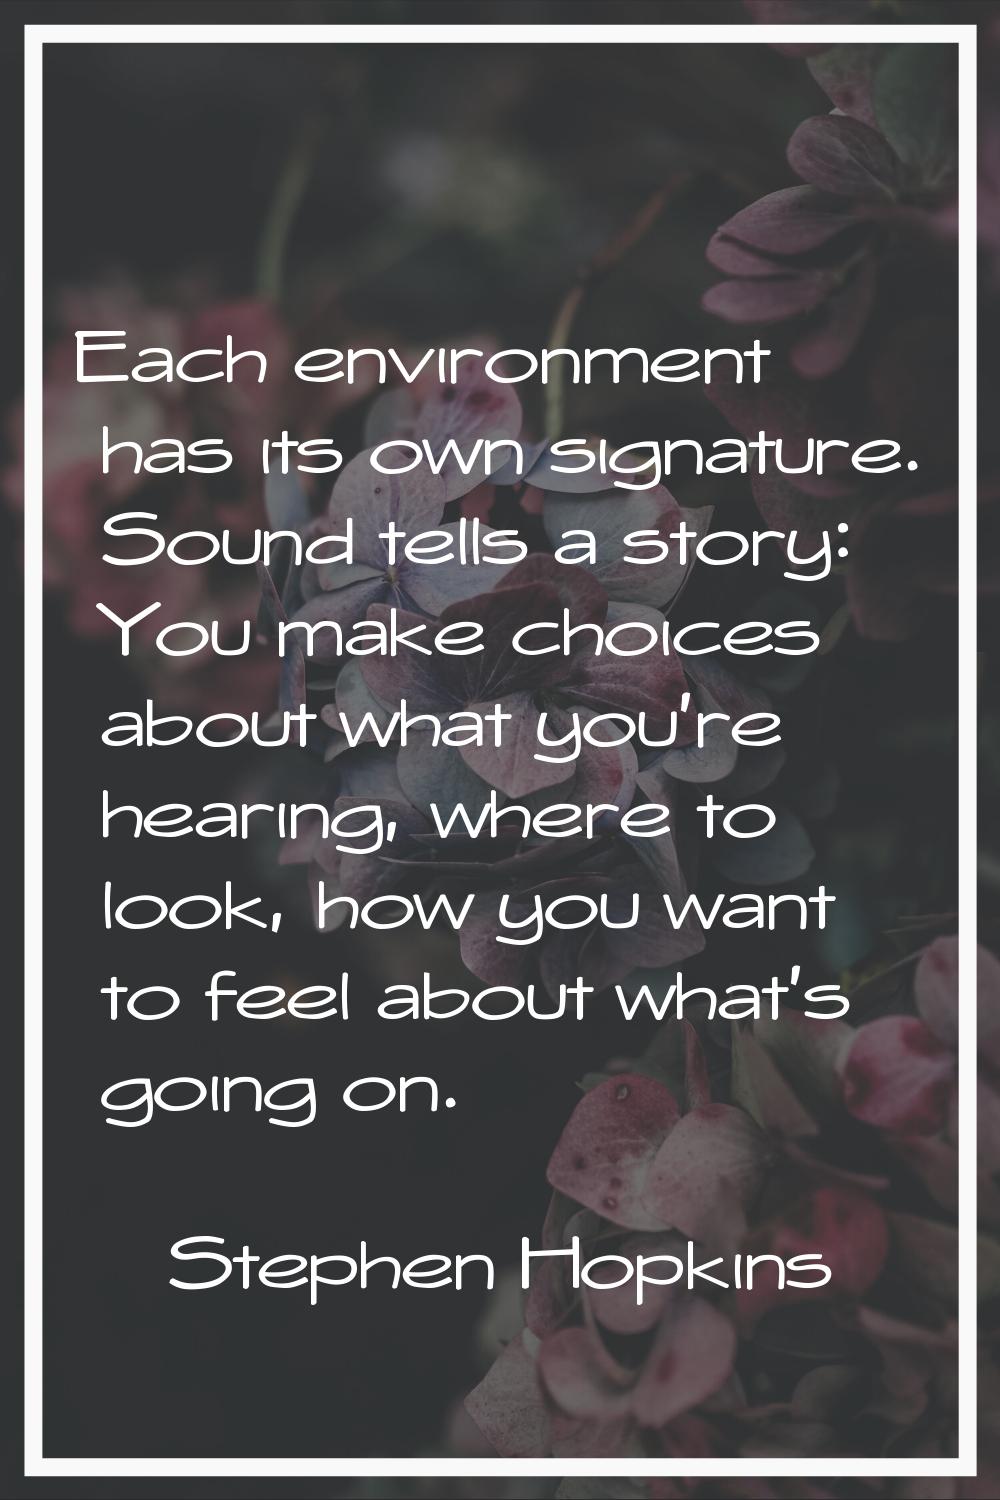 Each environment has its own signature. Sound tells a story: You make choices about what you're hea